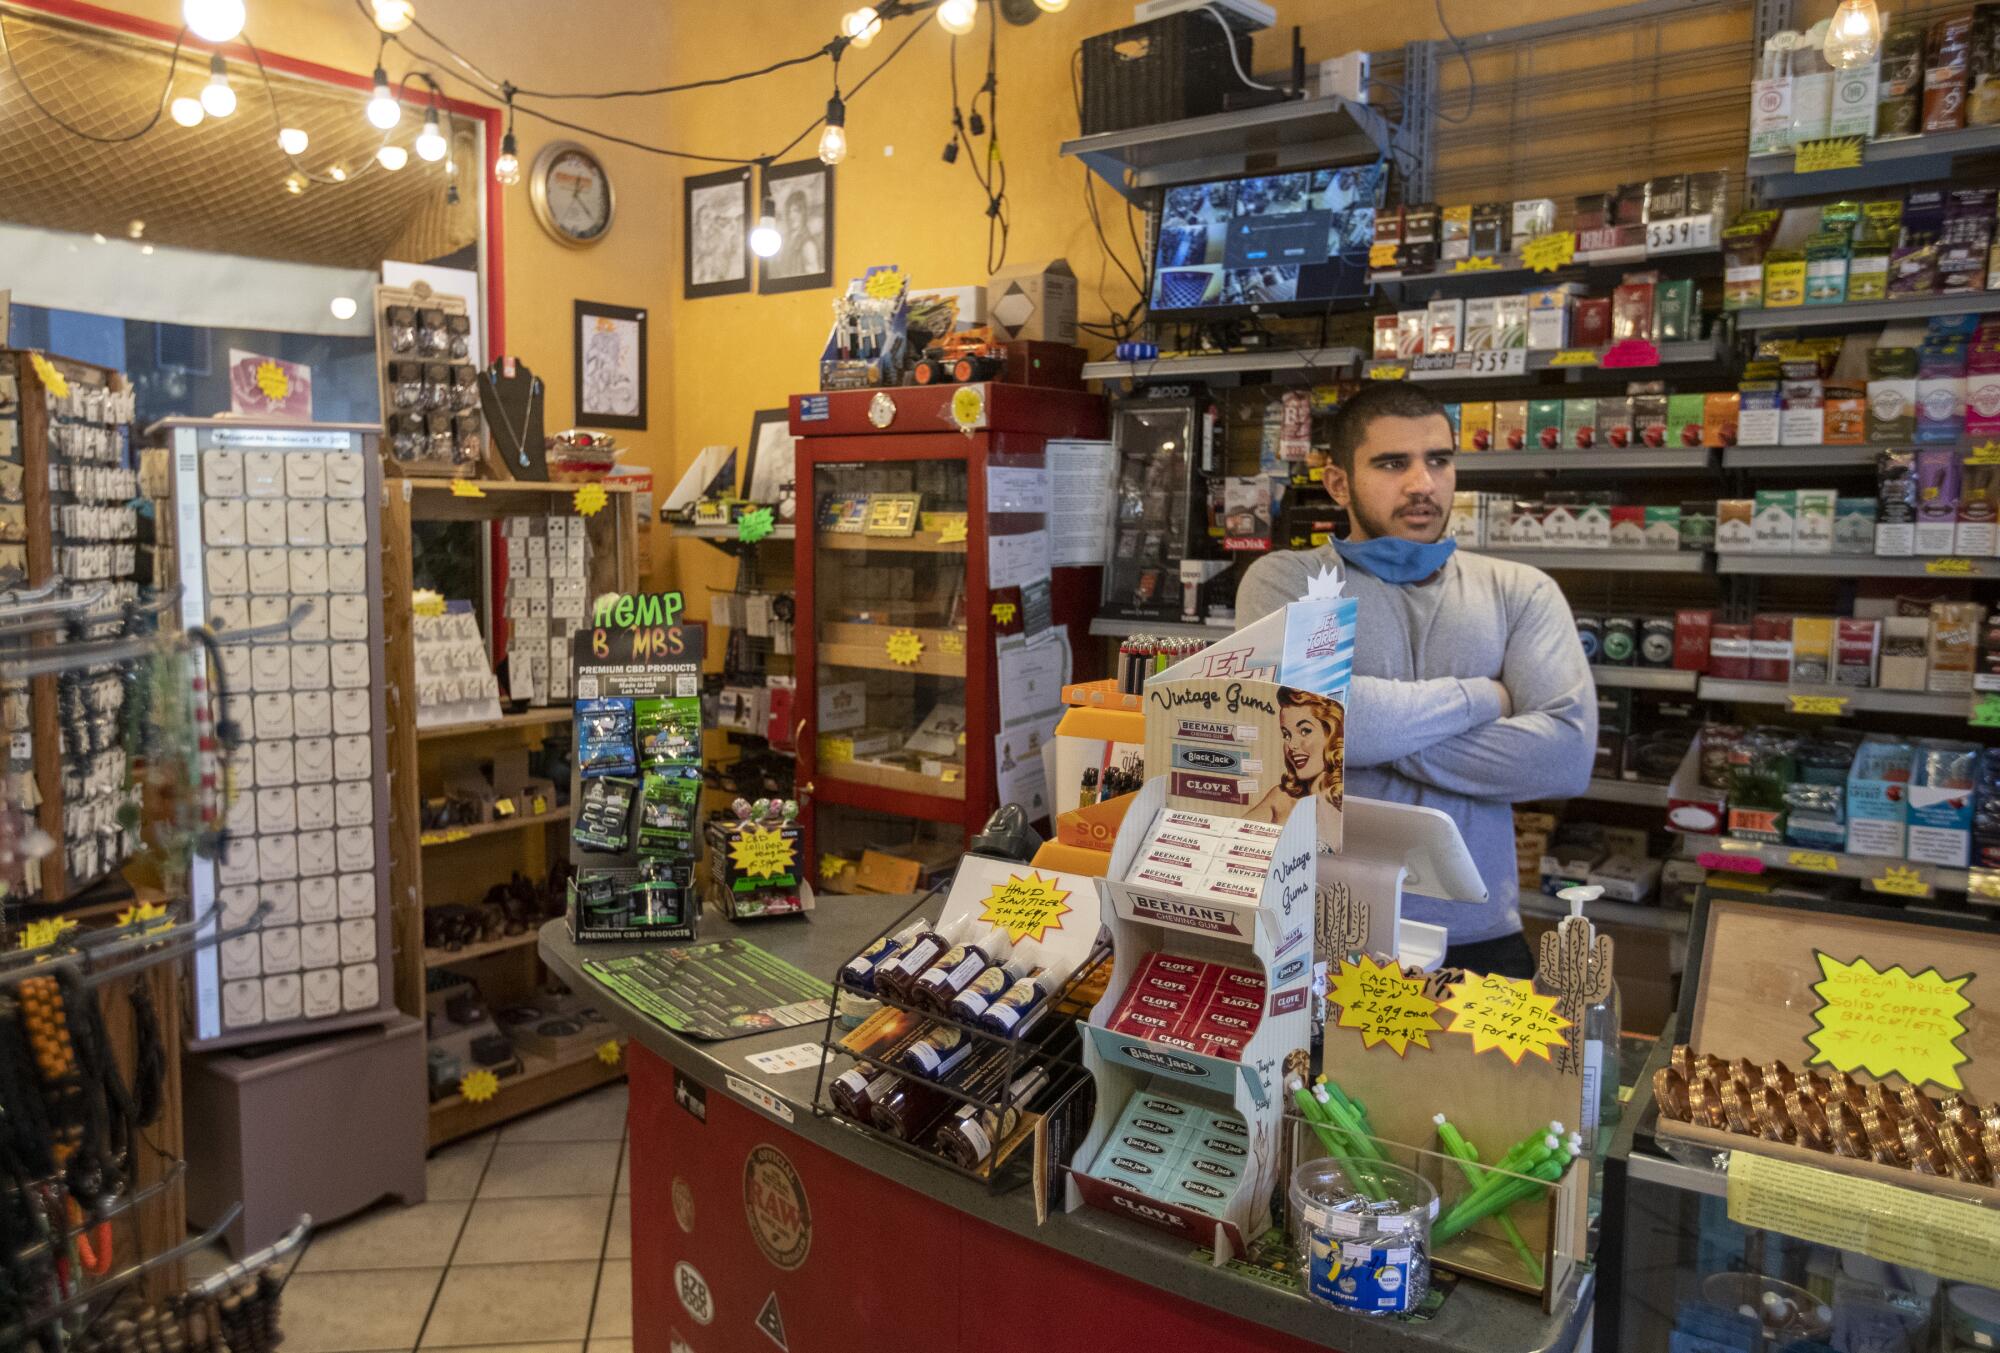 Hassan Sowid waits for customers at Mel's Bisbee Bodega, which is owned by his uncle.